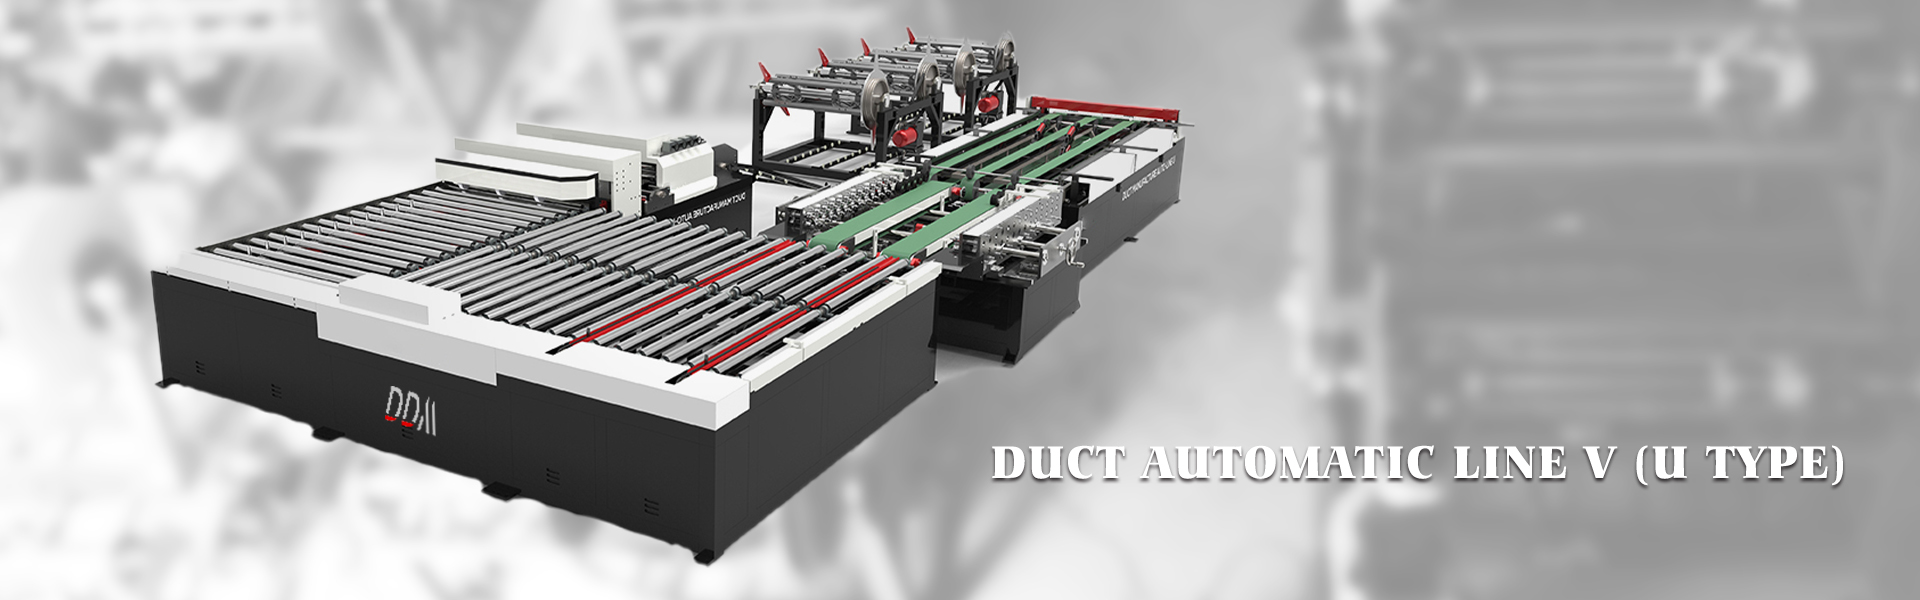 DUCT AUTOMATIC LINE V BANNER 04